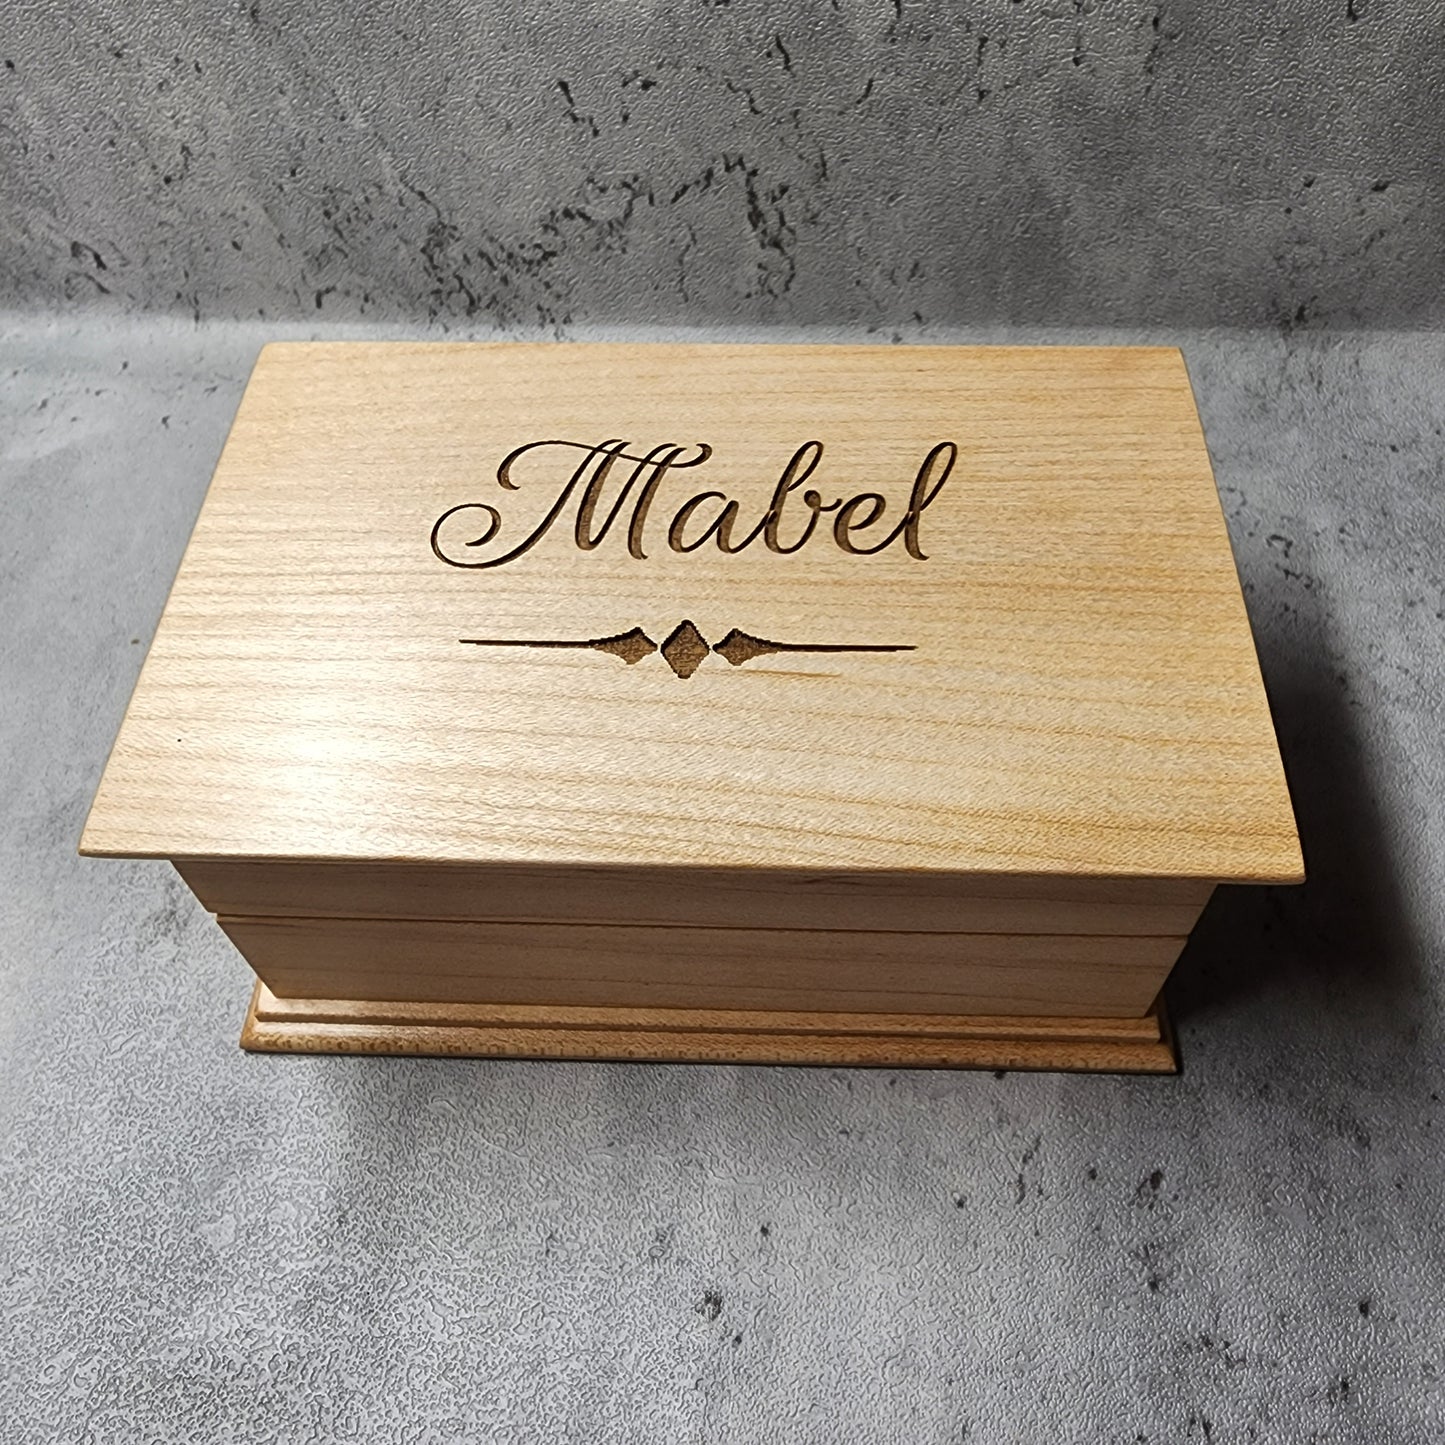 wooden jewelry box with a name engraved on it with a beautiful script font, and a decorative underline. it plays your song in music box sound when you open it, and you can choose the color and add a personalized message to the bottom side of box